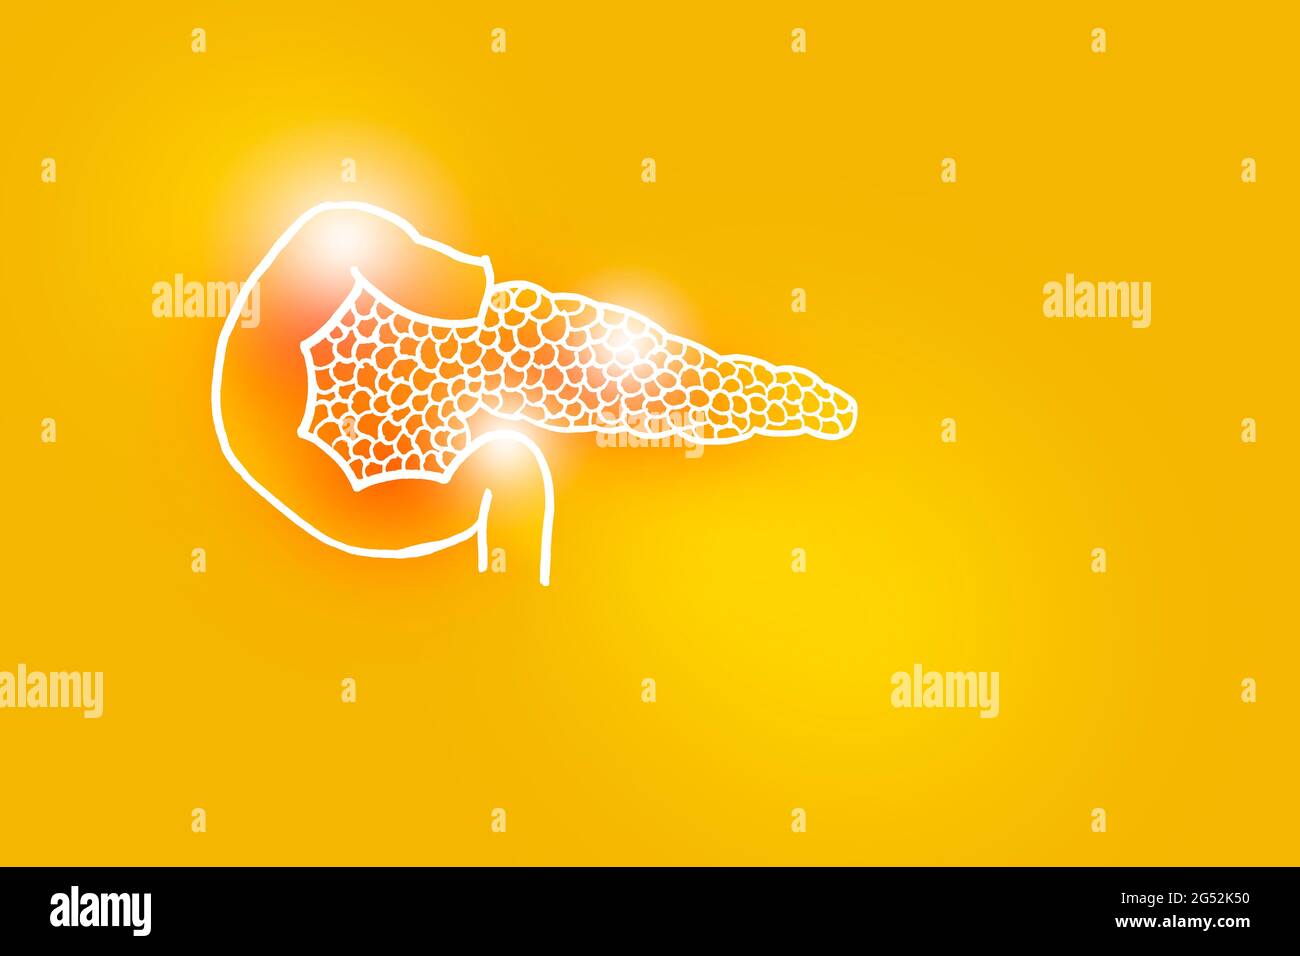 Handrawn illustration of human Pancreas on yellow background. Medical, science set with main human organs with empty copy space for text Stock Photo